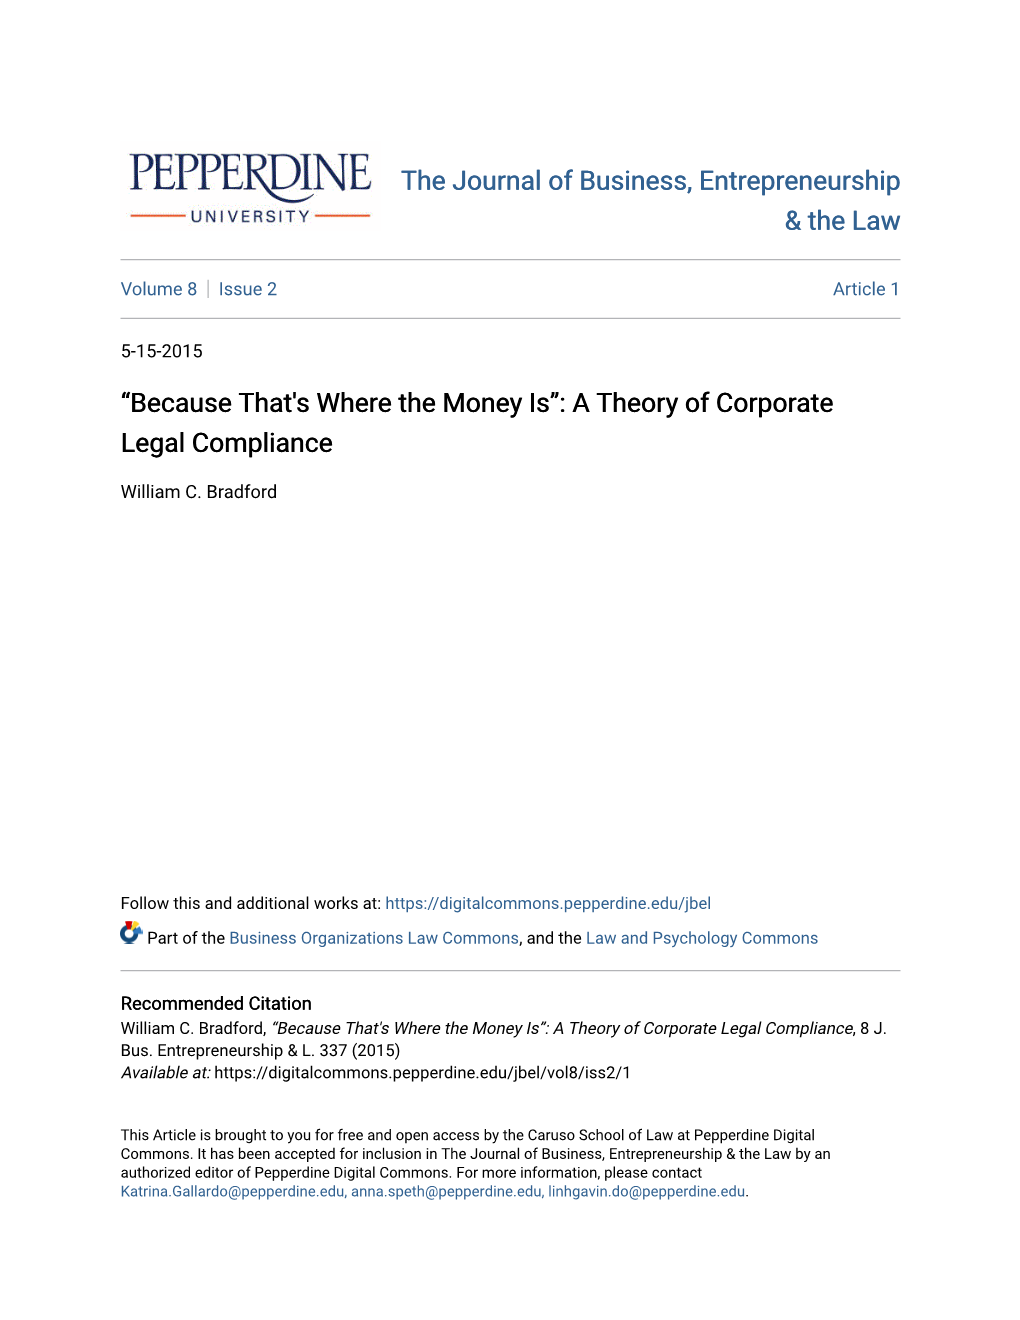 A Theory of Corporate Legal Compliance